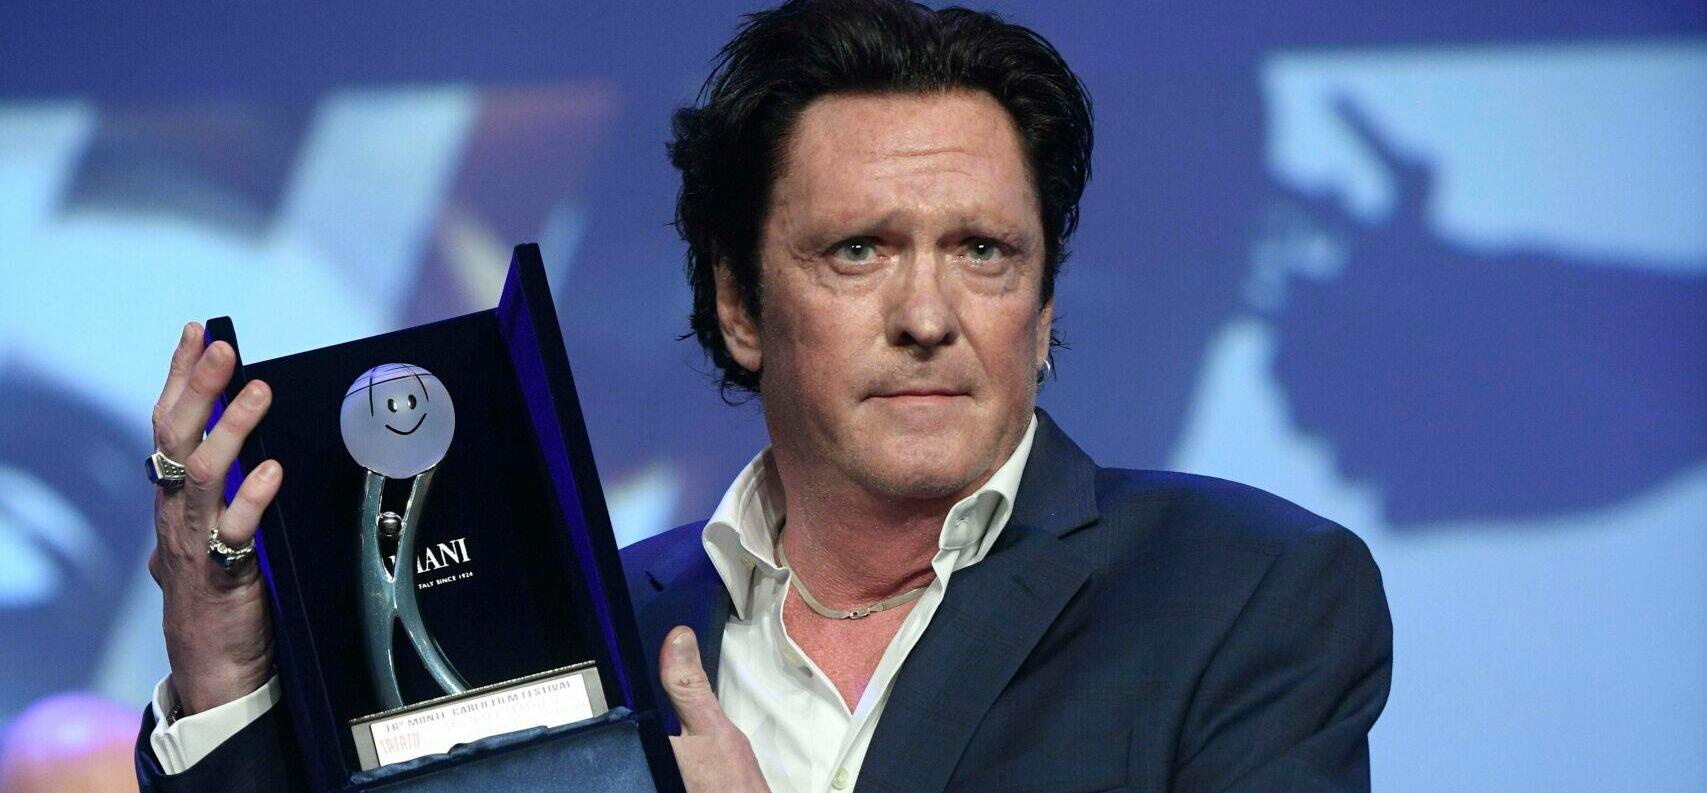 Michael Madsen Requesting A Full Military Investigation Into Son’s Suicide